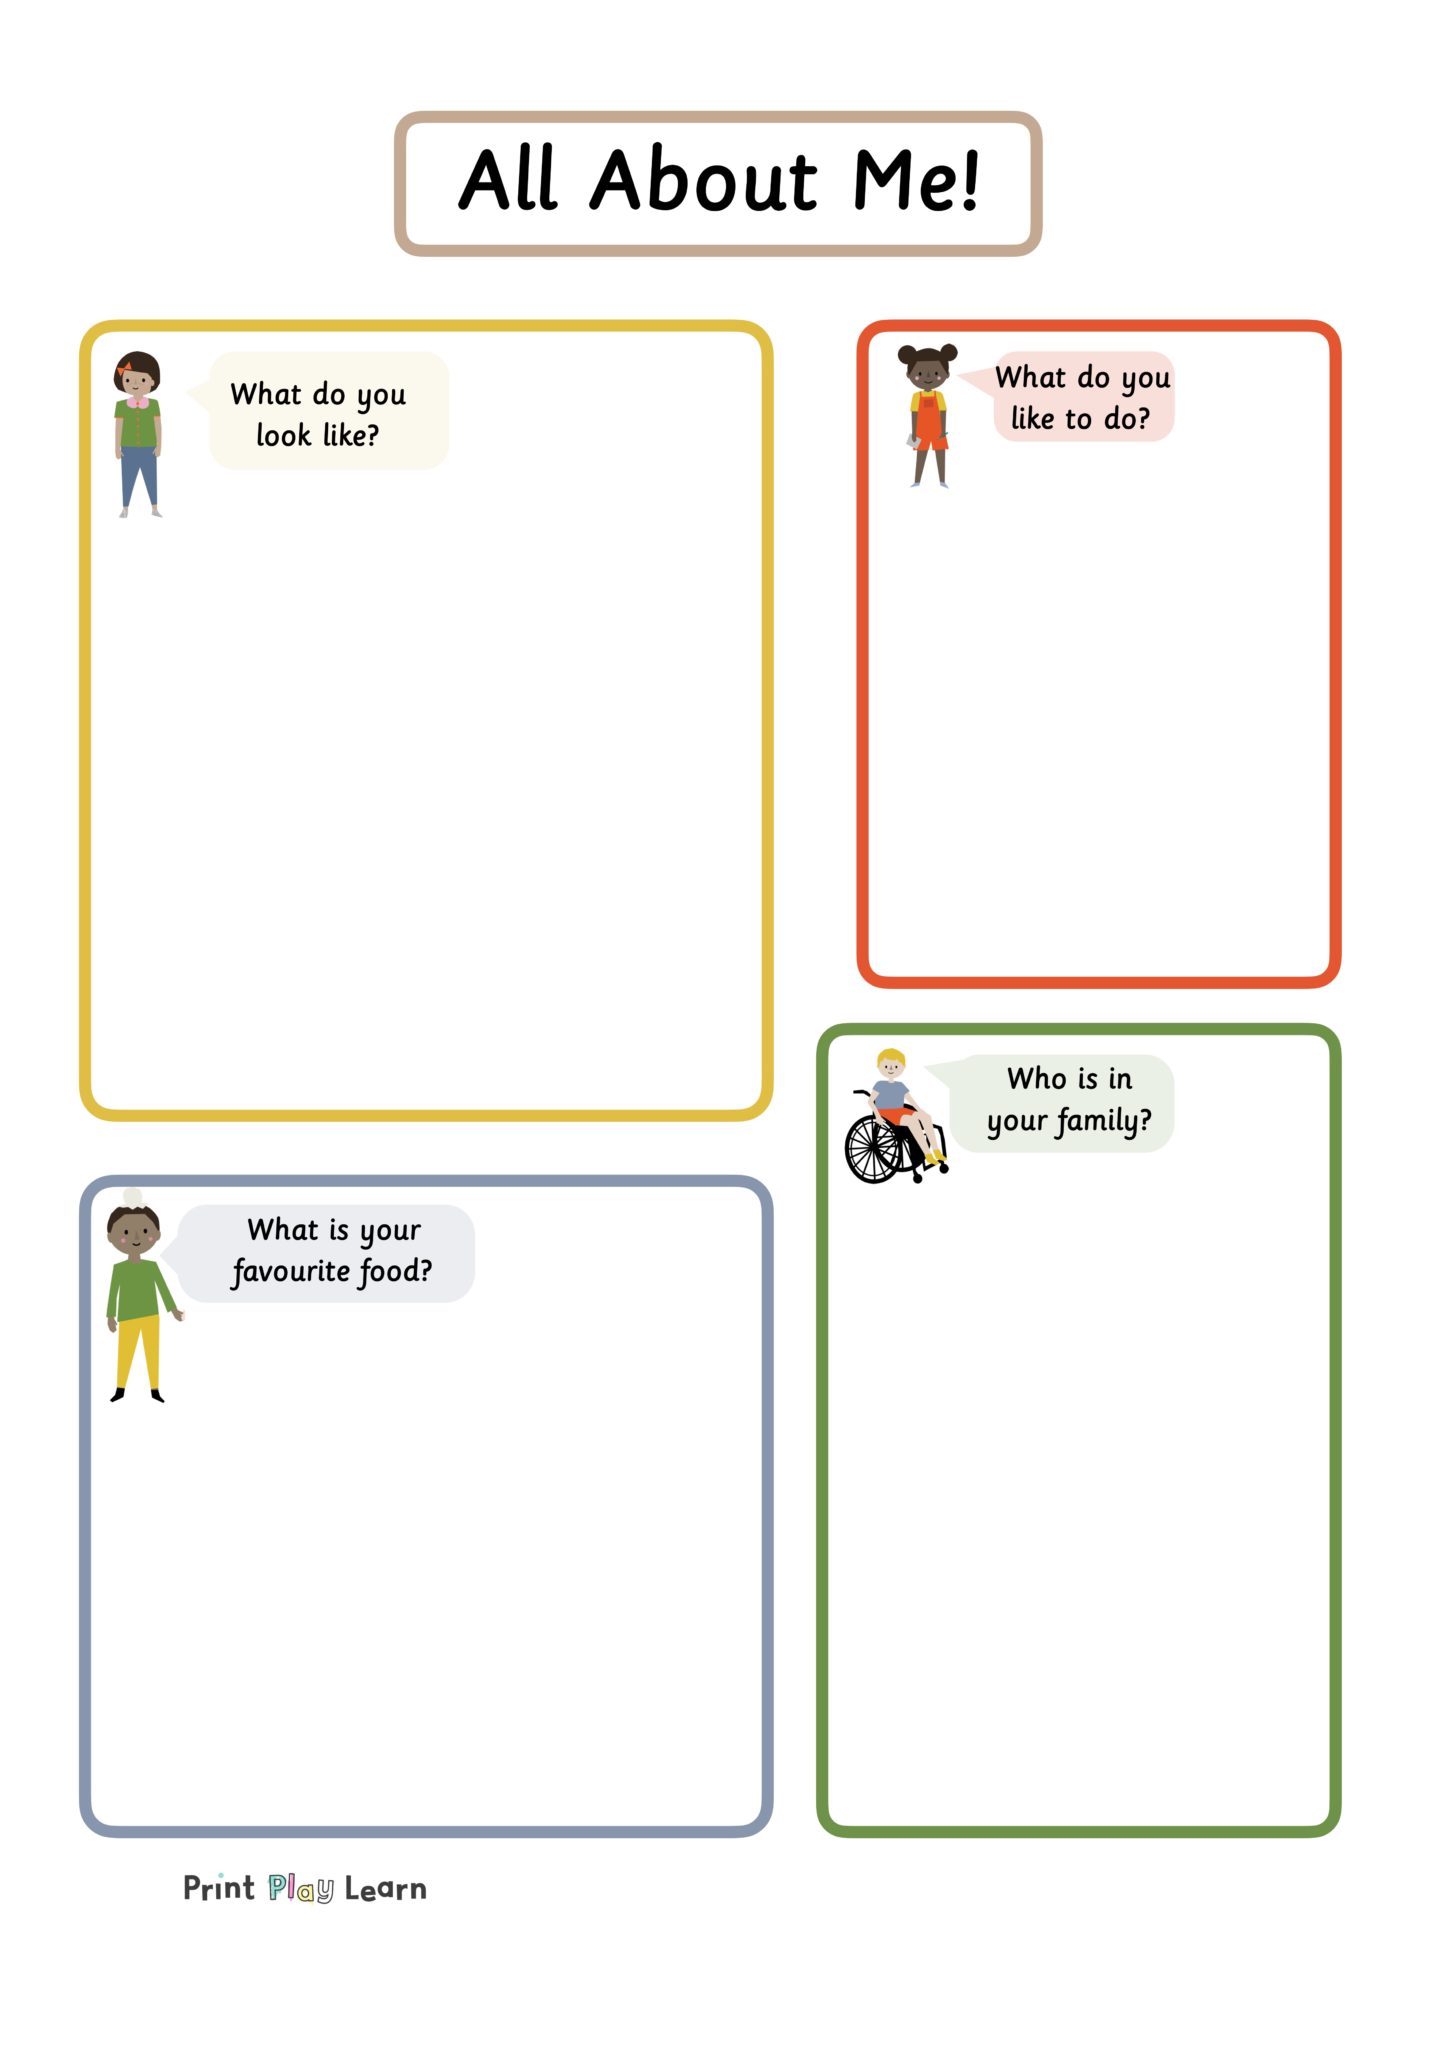 meet-the-teacher-all-about-me-template-printable-teaching-resources